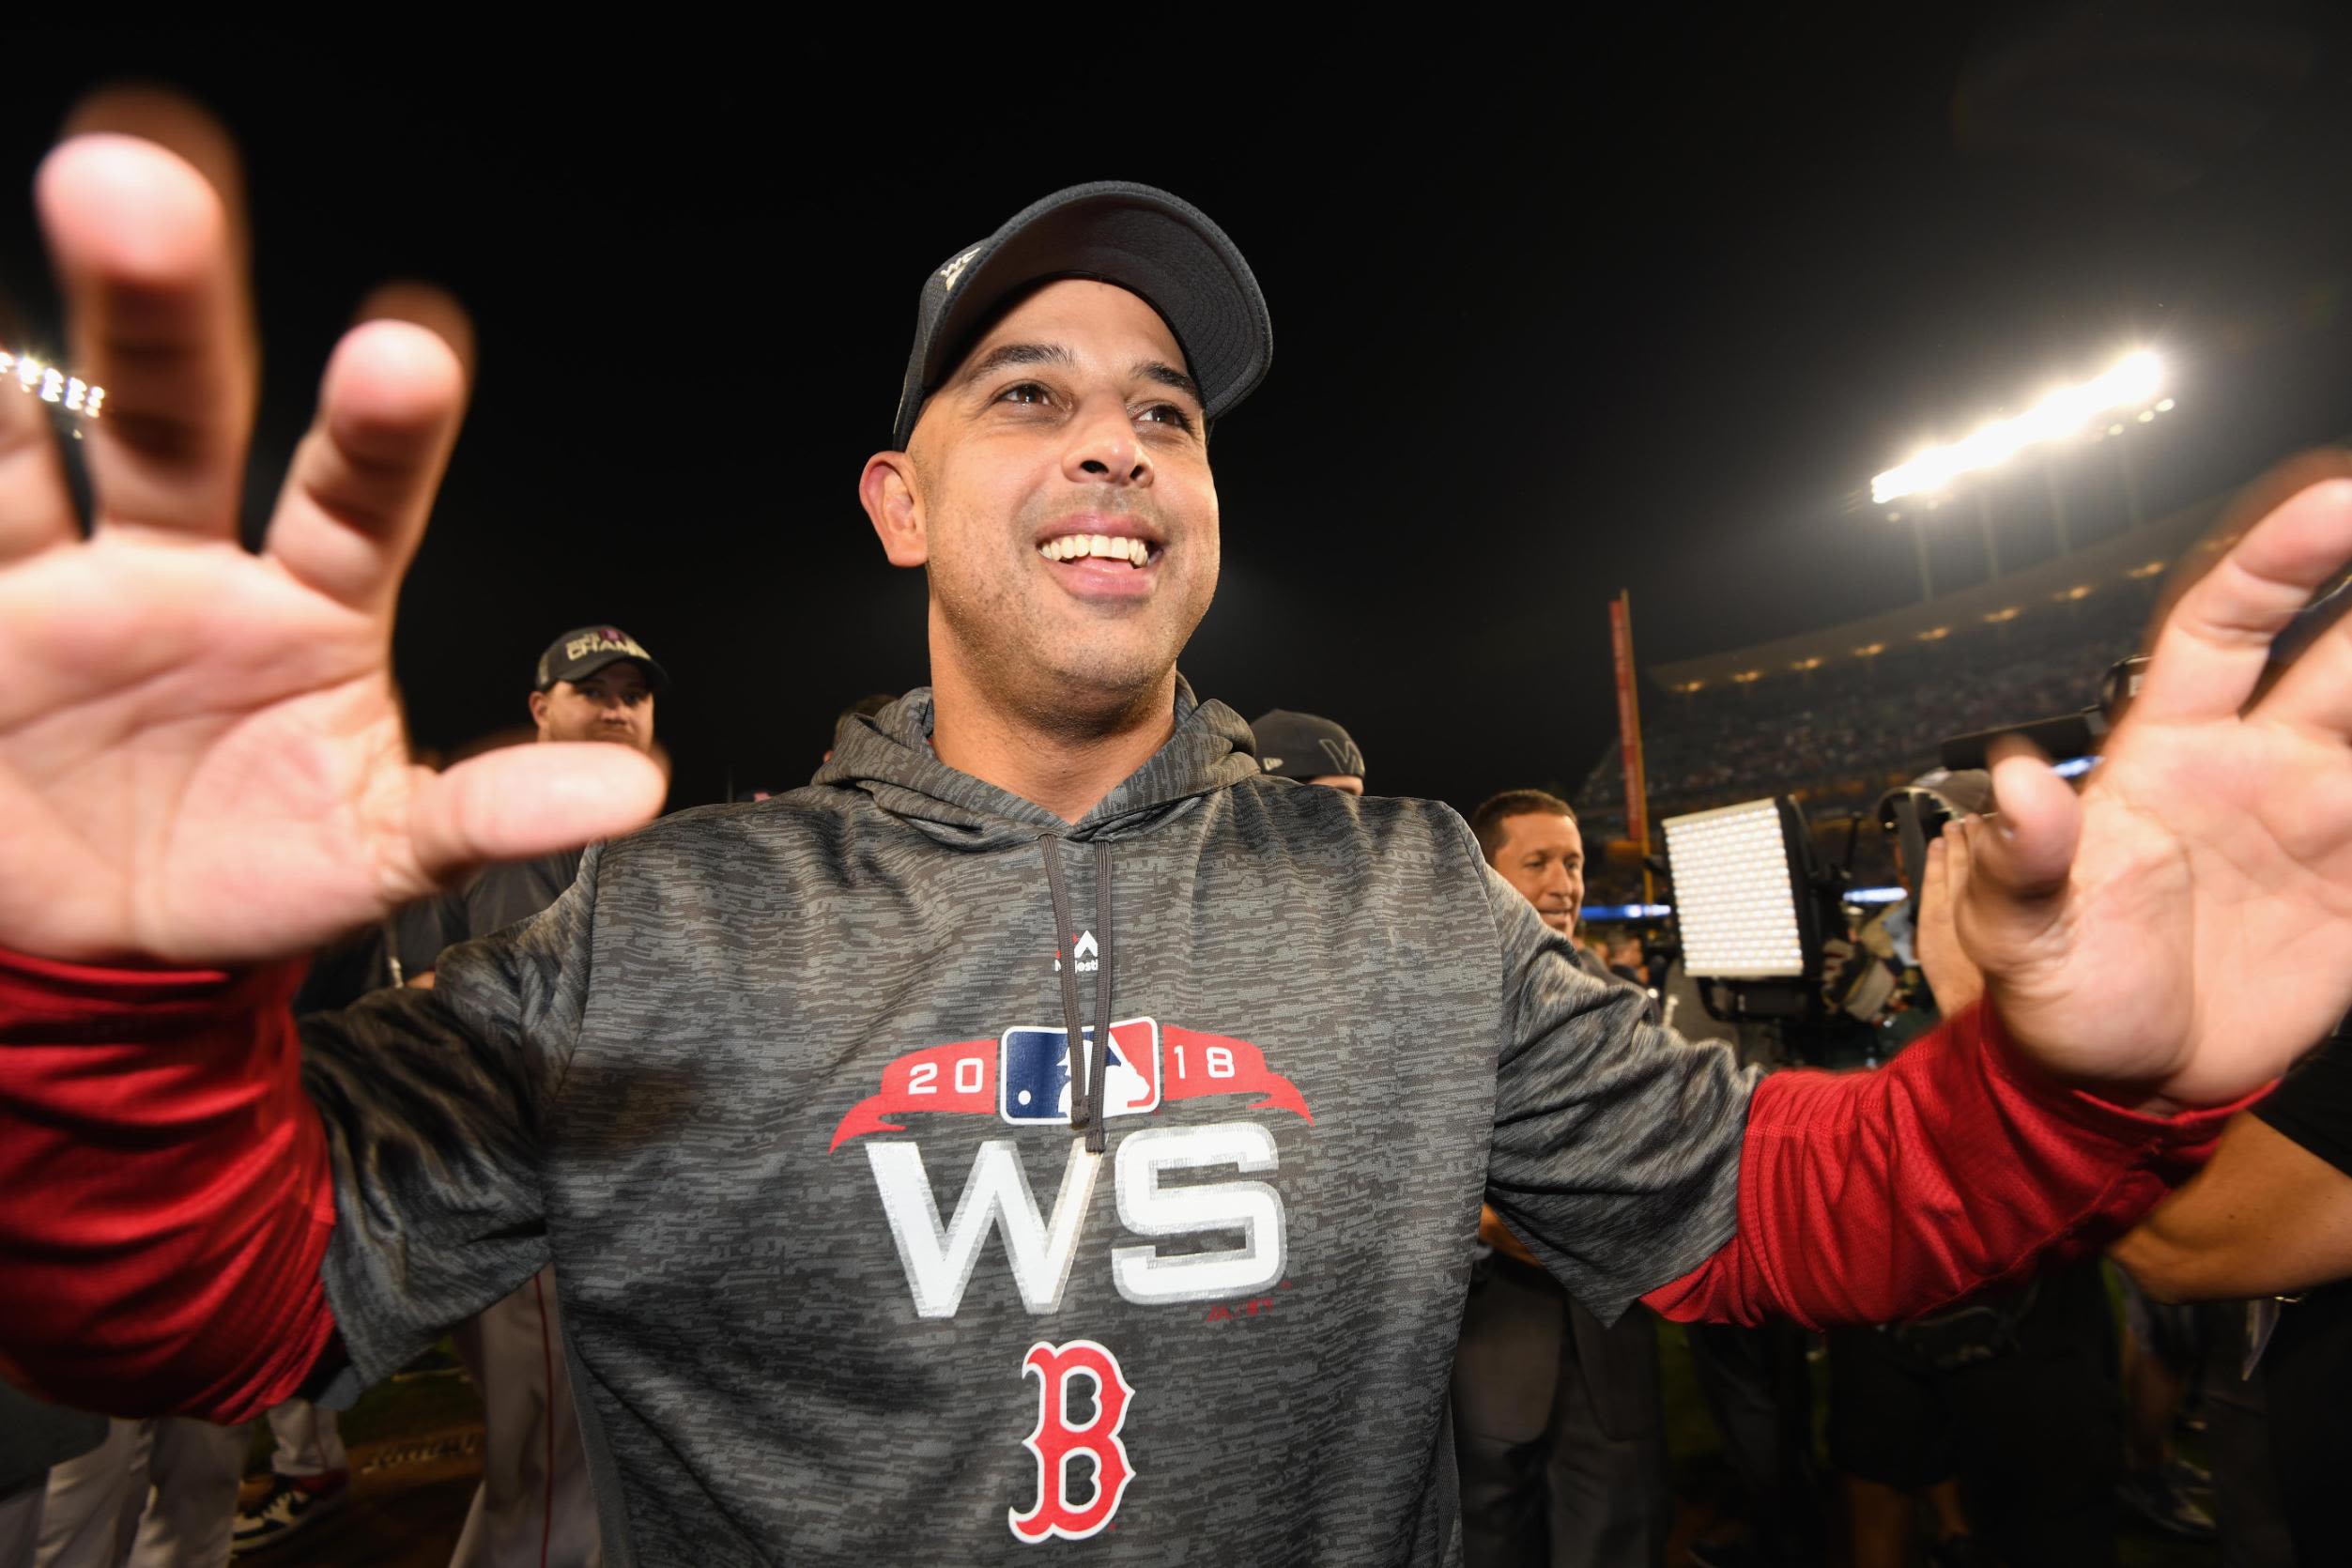 Can Alex Cora Be a New Business Face for Baseball?